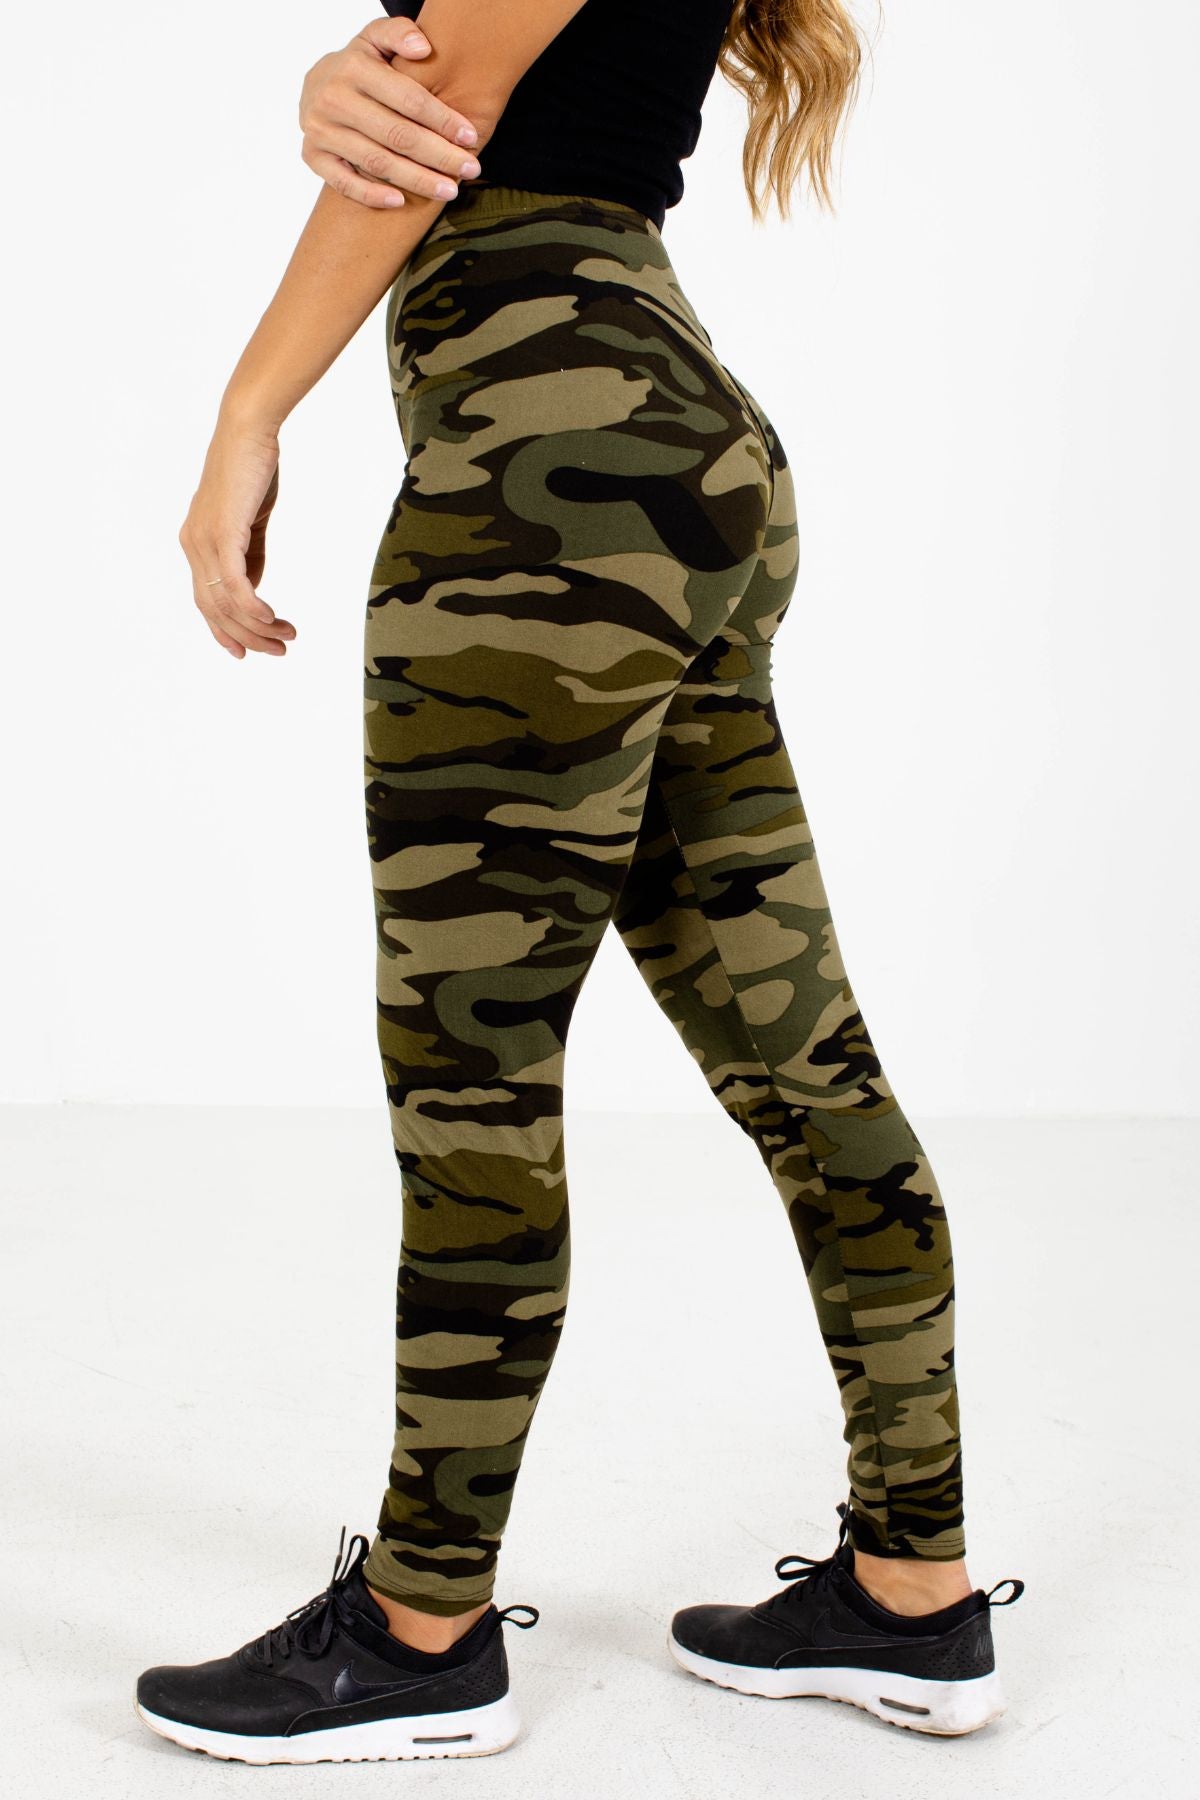 Green Cute and Comfortable Boutique Activewear Leggings for Women